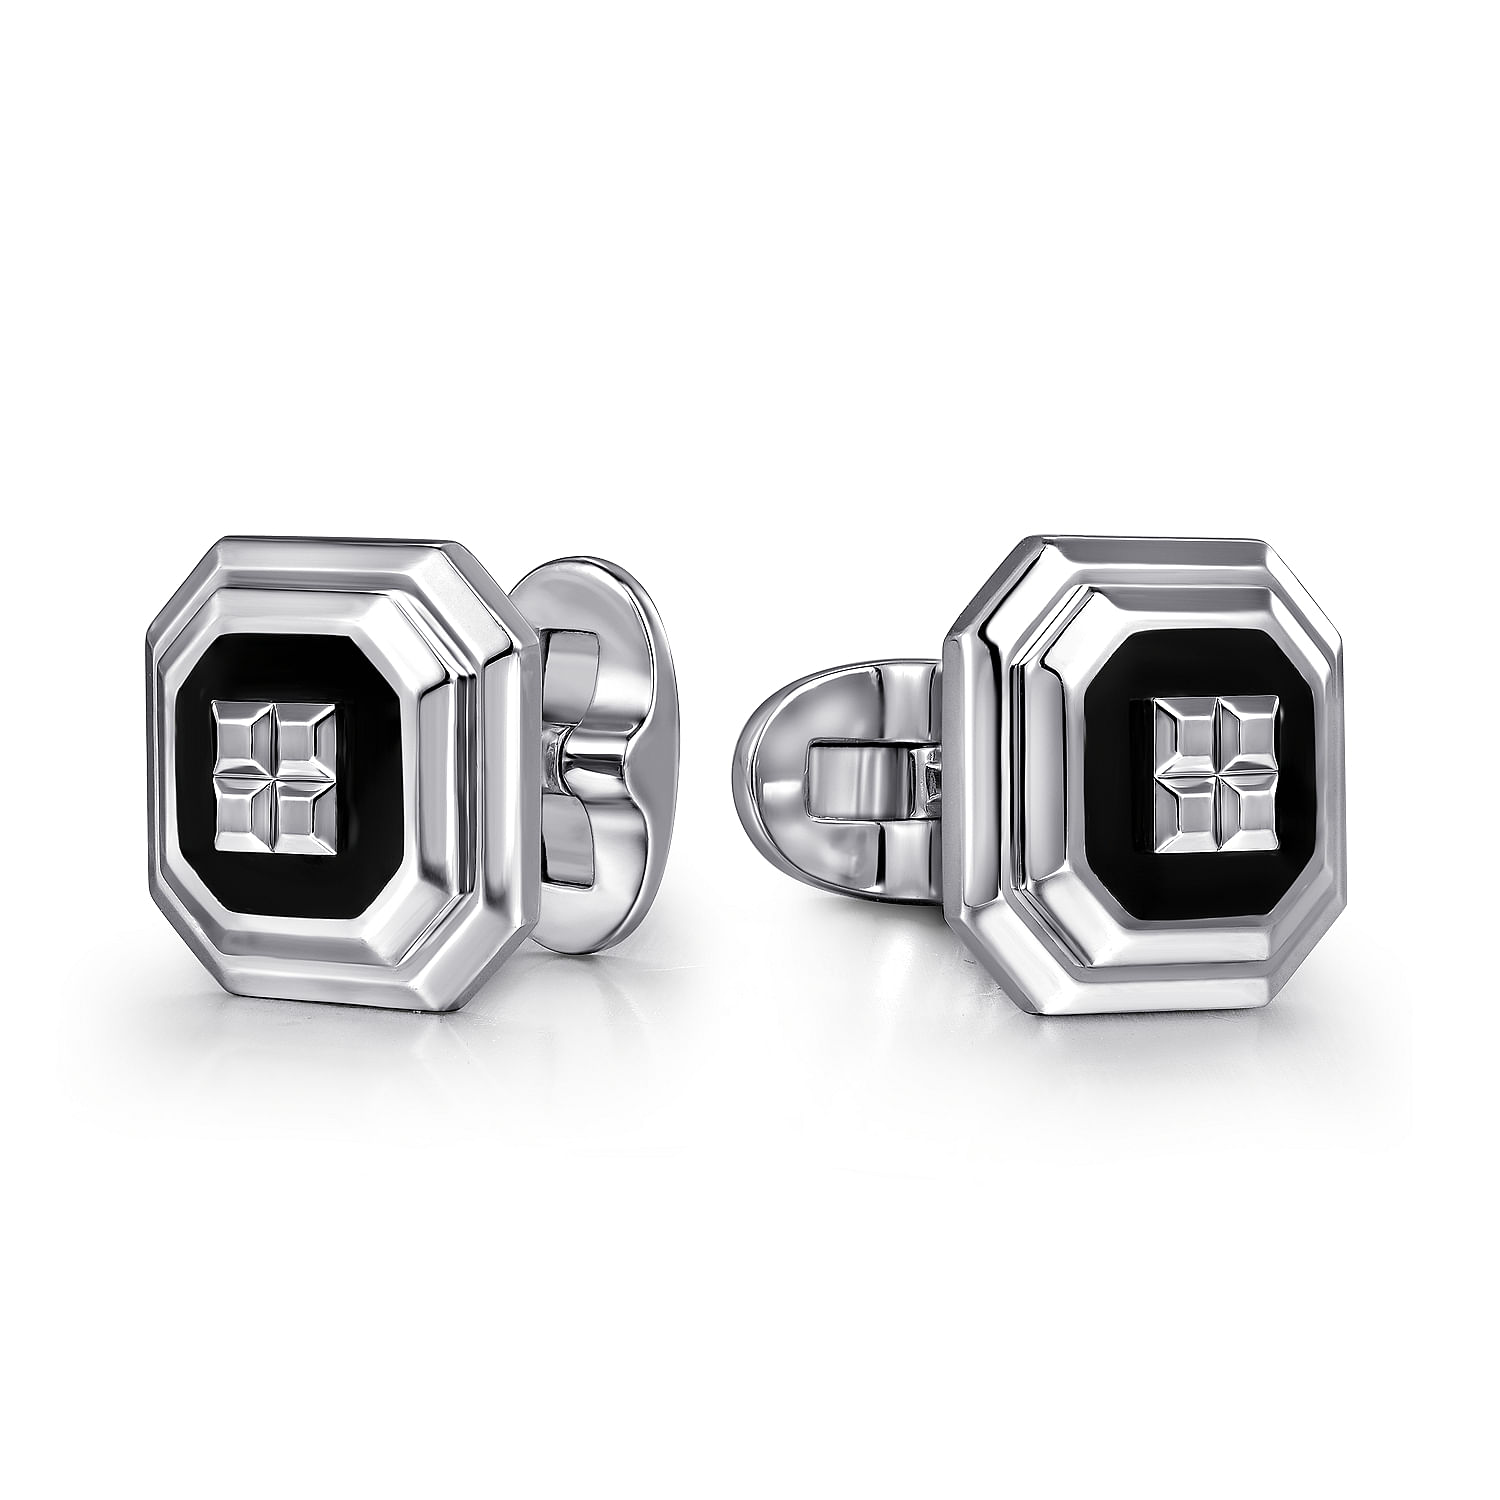 Sterling Silver Square Cufflinks With Black Enamel